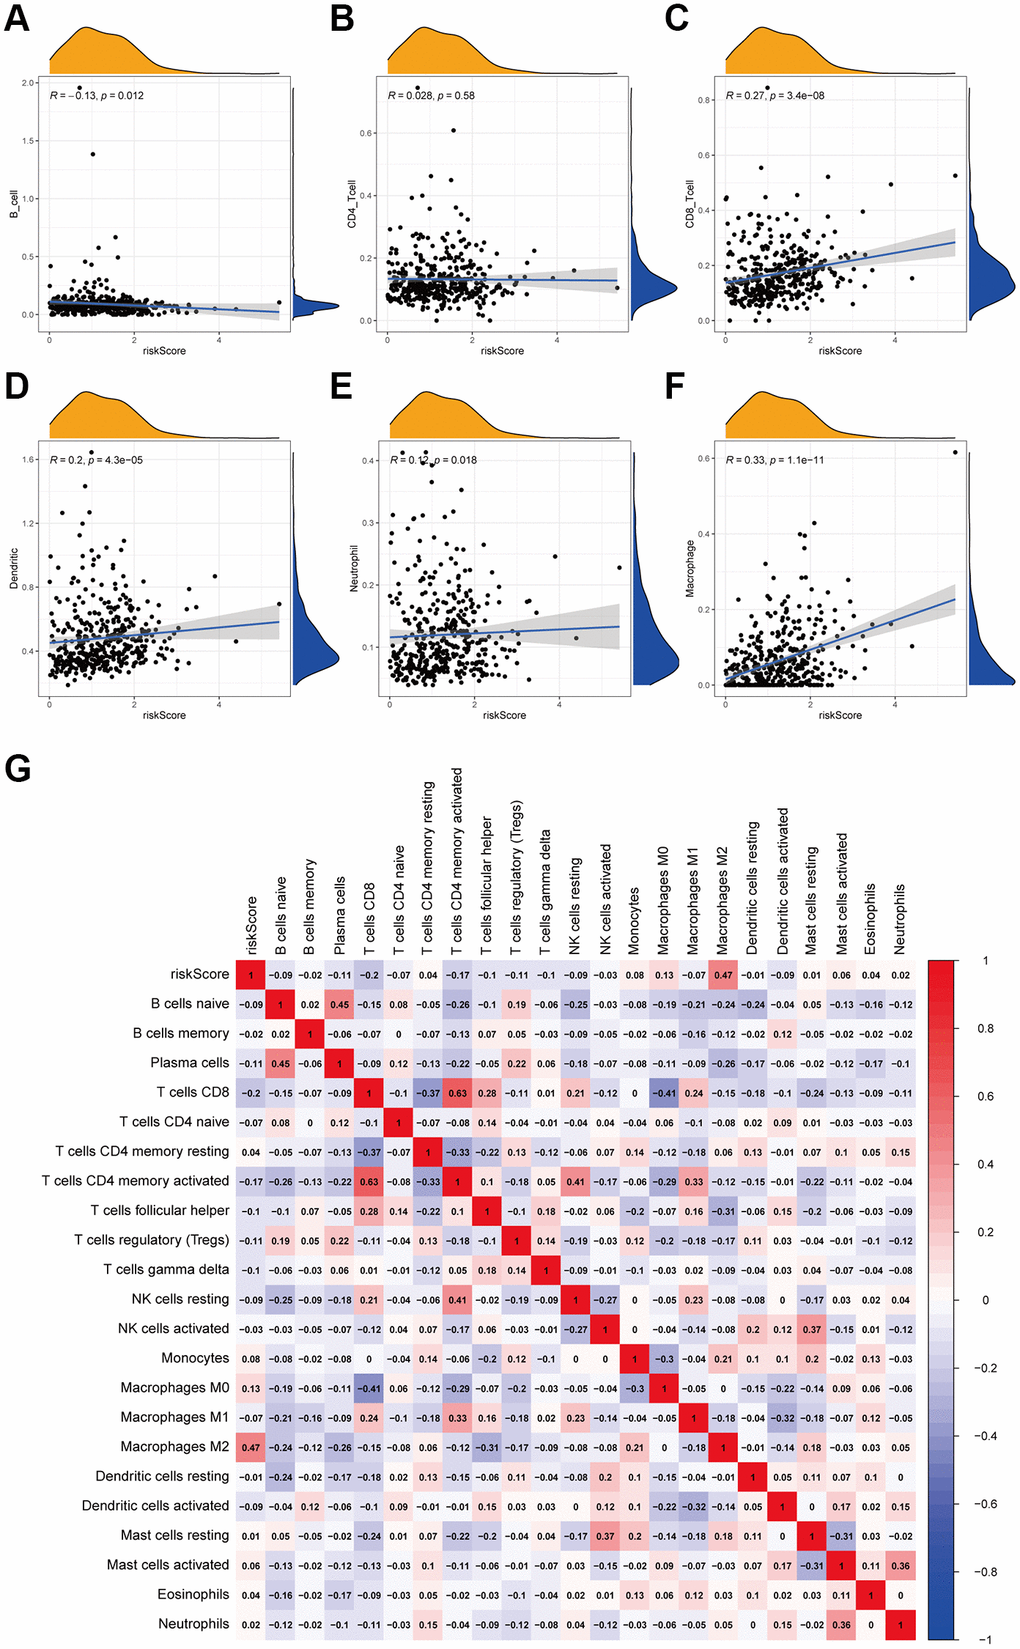 Correlation between the 12 lncRNA prognostic signature for bladder cancer and the infiltration of immune cell subtypes. The correlation values of all the immune cells with risk score. (A) B cells. (B) CD4+ T cell. (C) CD8+ T cell. (D) Dendritic. (E) Neutrophil. (F) Macrophage. (G) The correlation of immune cell infiltration and risk scores according to the infiltration results estimated by CIBESORT.